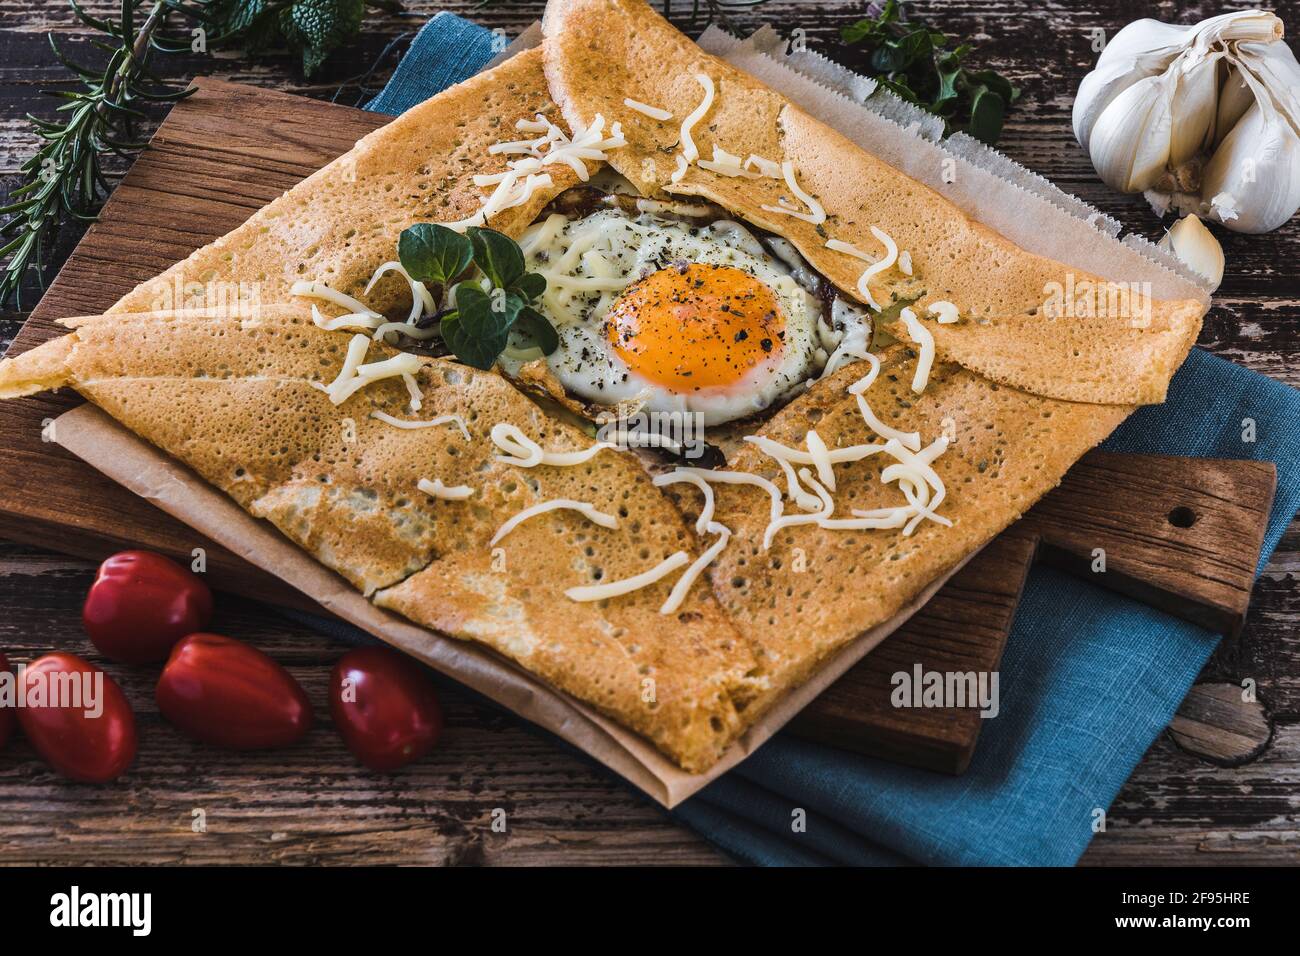 French pancake crepe with fried egg, herbes, tomatoes and cheese on a slat on blue linen on a wooden table. Closeup. Stock Photo